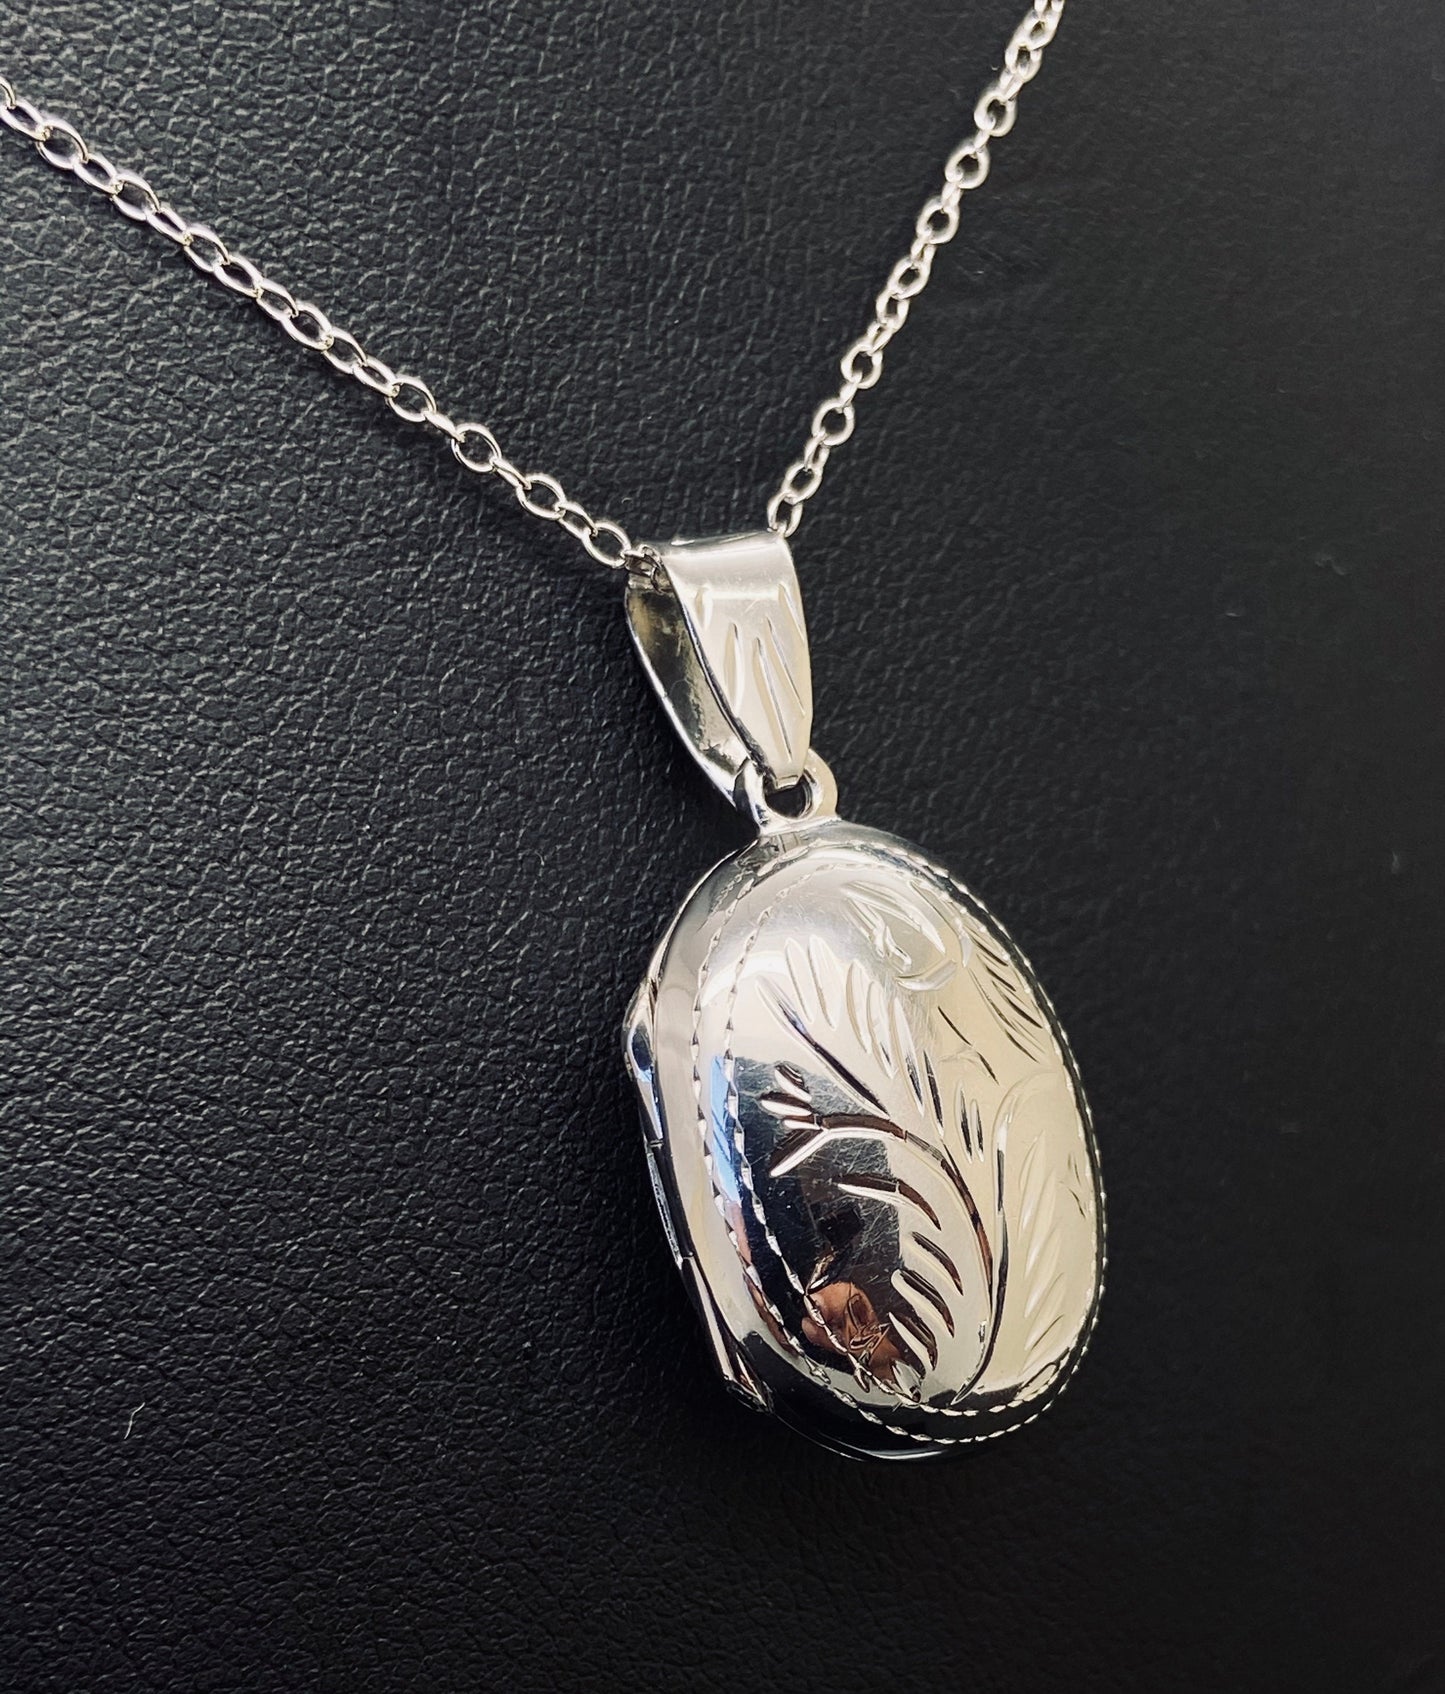 Etched Oval Locket Pendant Chain Necklace